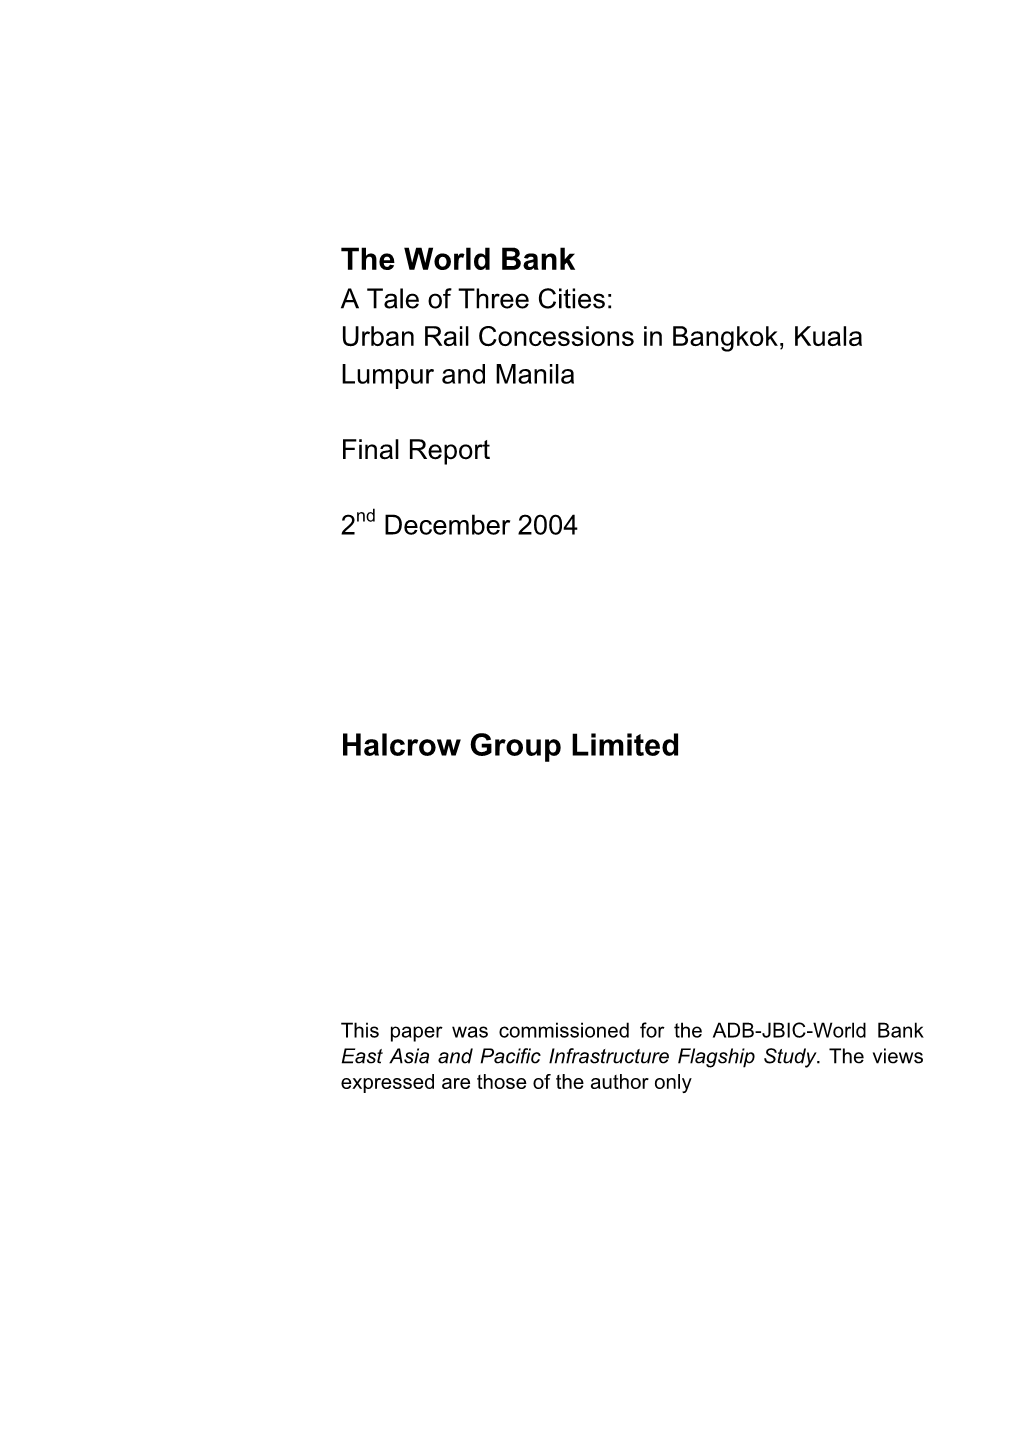 The World Bank Halcrow Group Limited